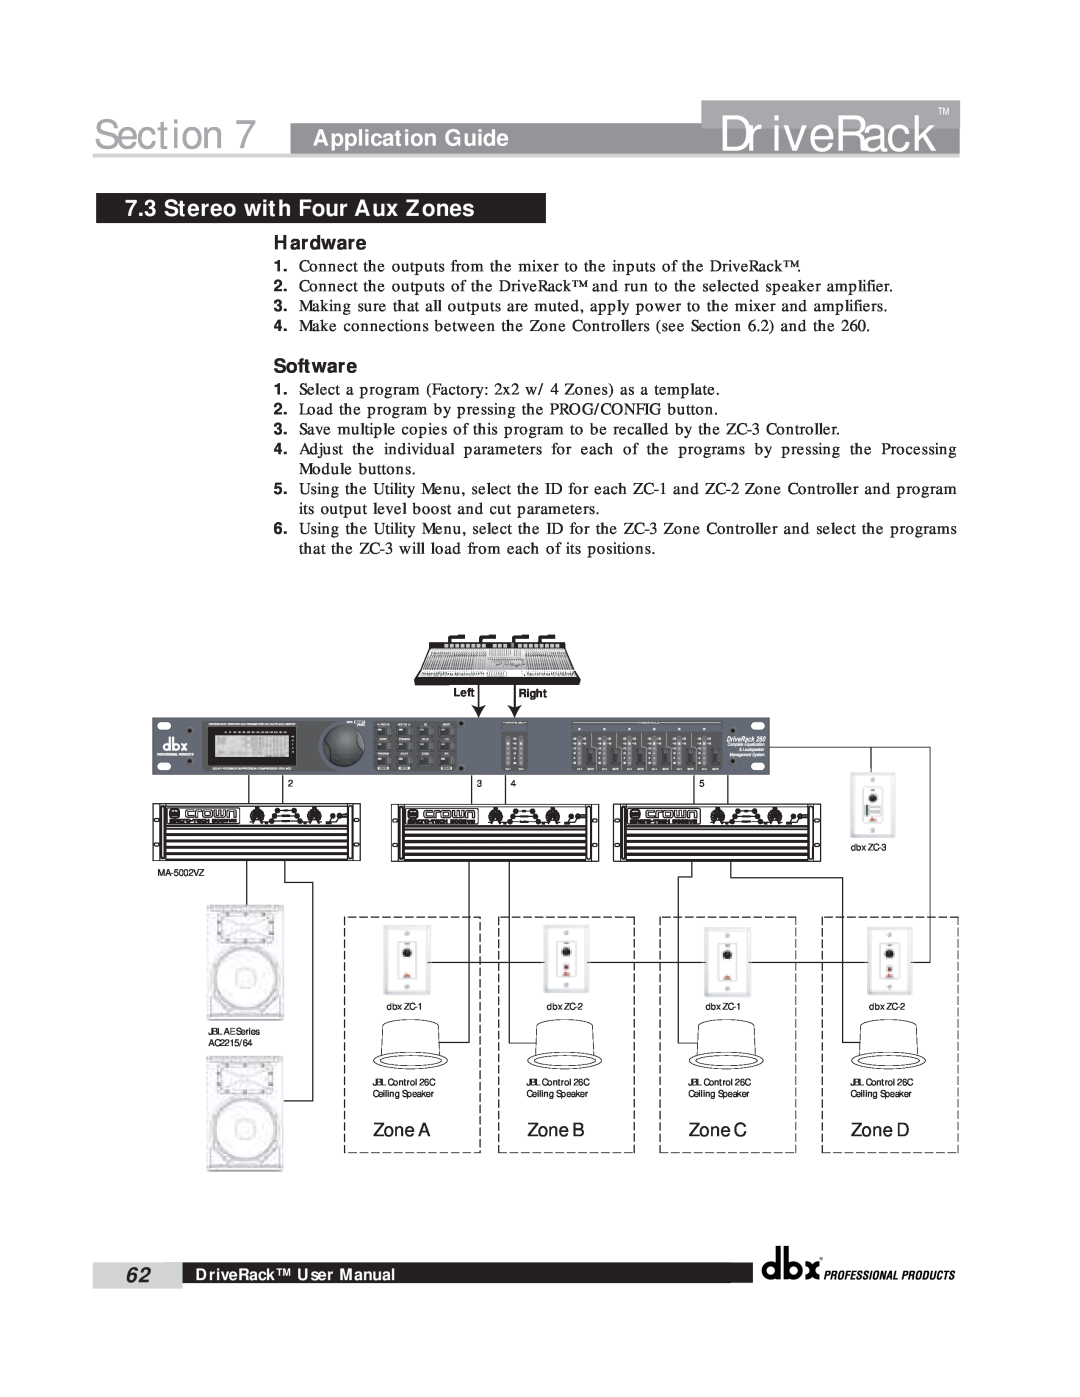 dbx Pro 260 user manual Stereo with Four Aux Zones, Section, DriveRack, Application Guide, Hardware, Software 